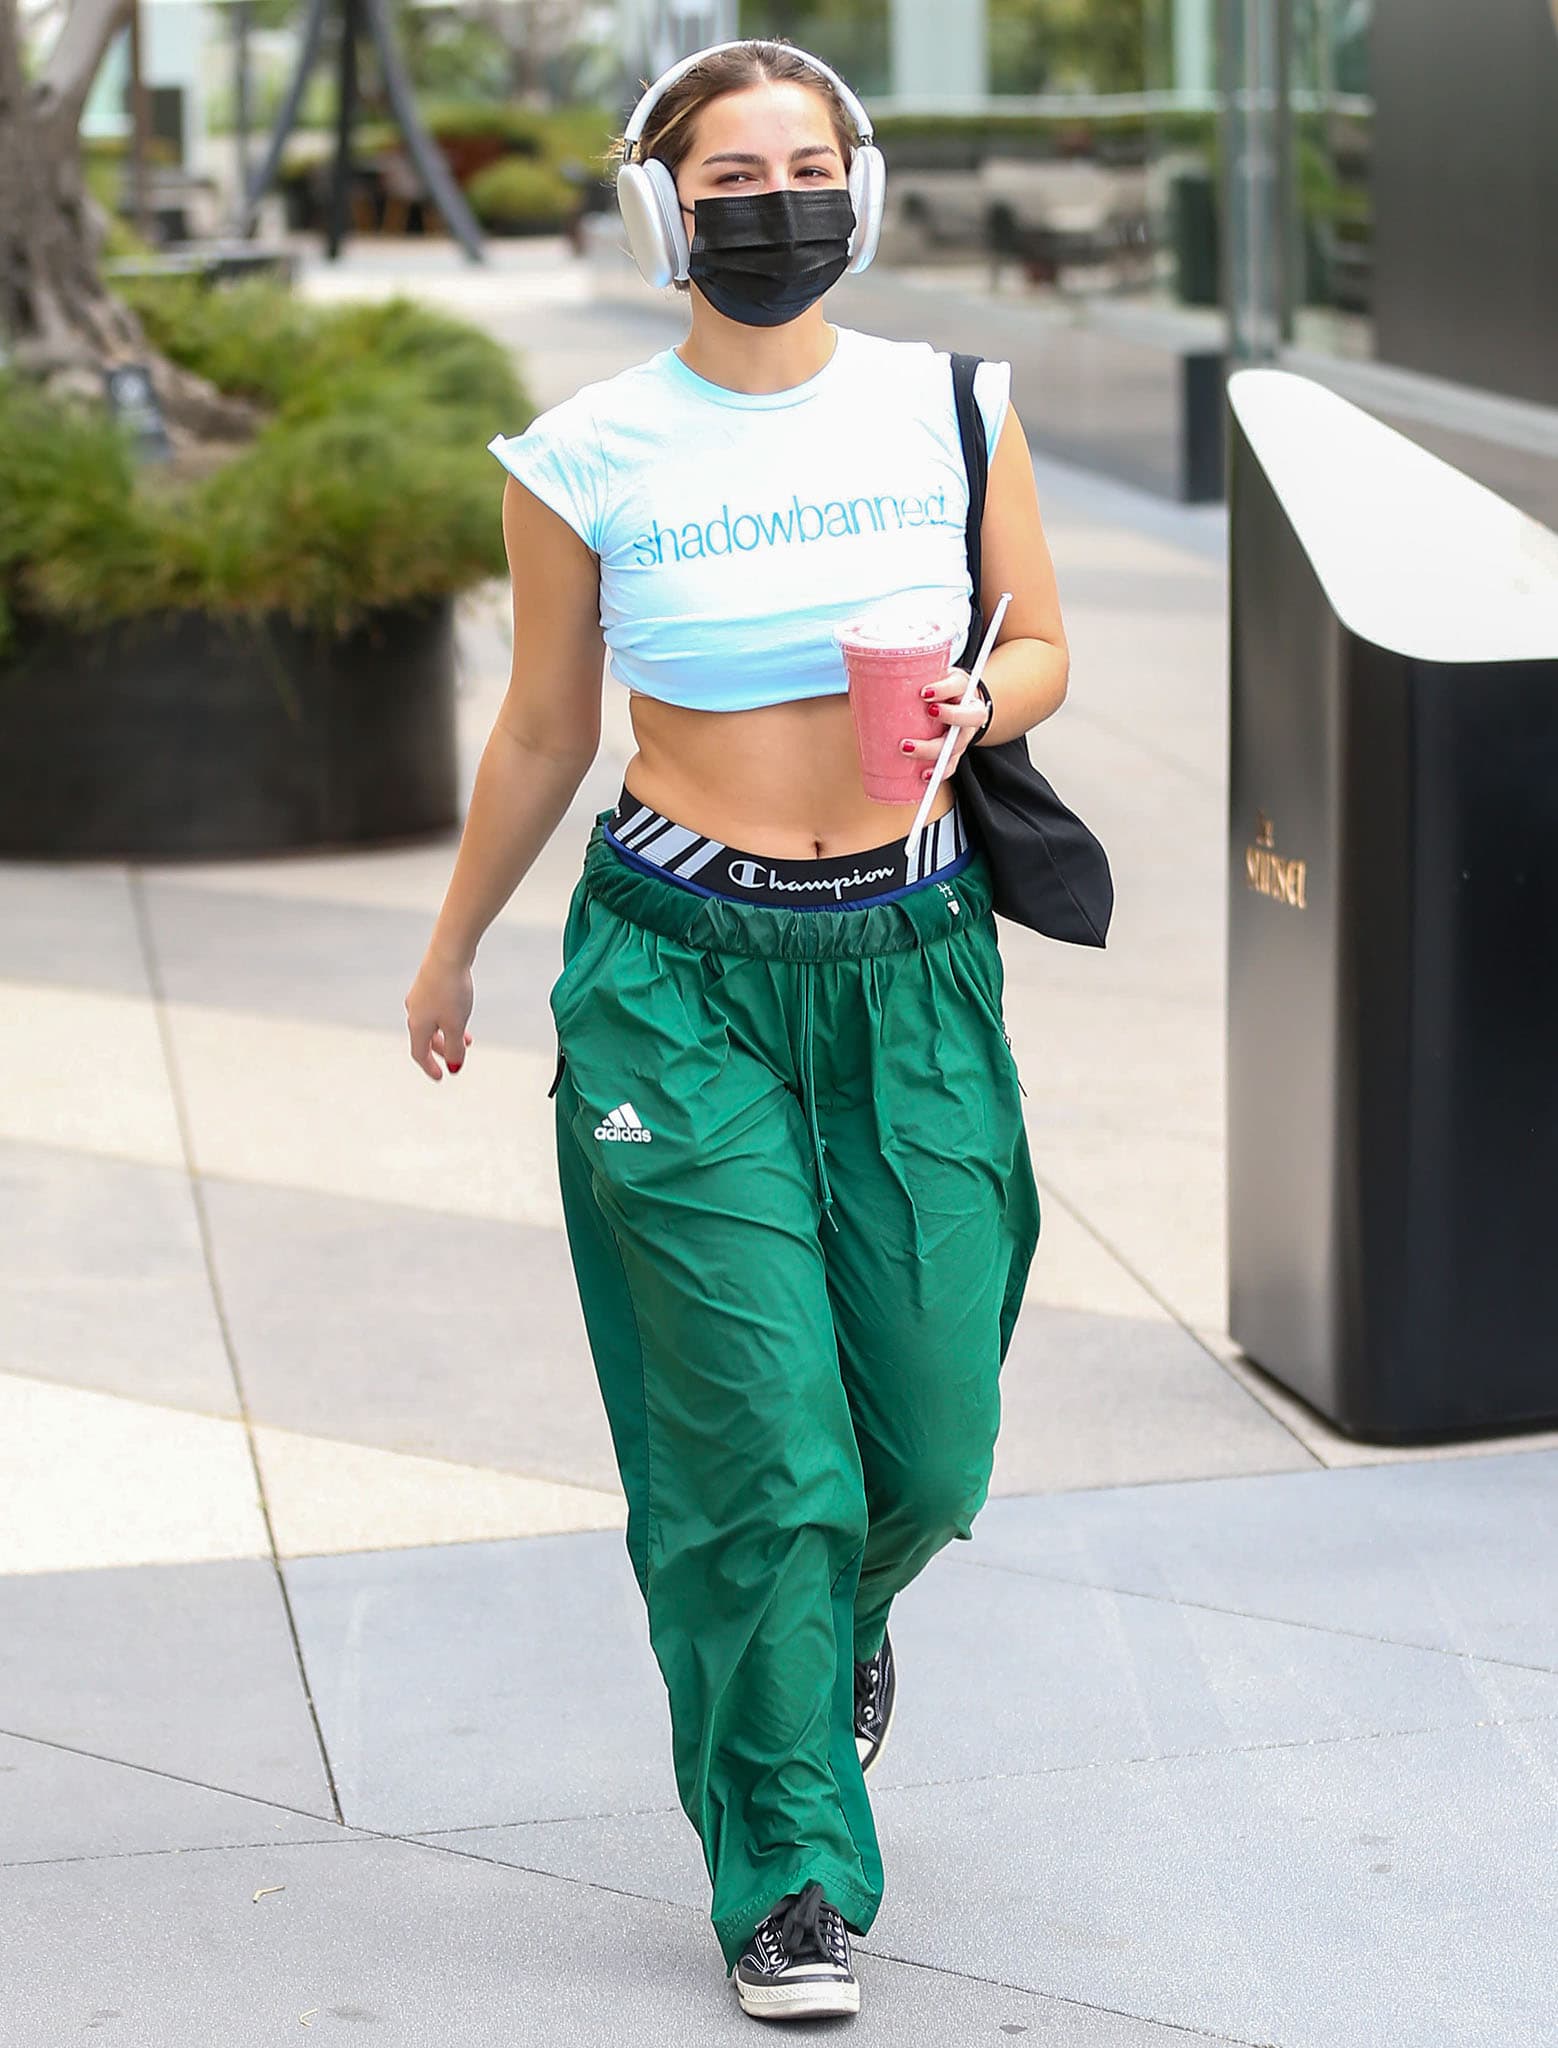 Addison Rae steps out for Pilates class in "shadowbanned" crop top and Adidas green pants after sharing new movie news on February 23, 2022